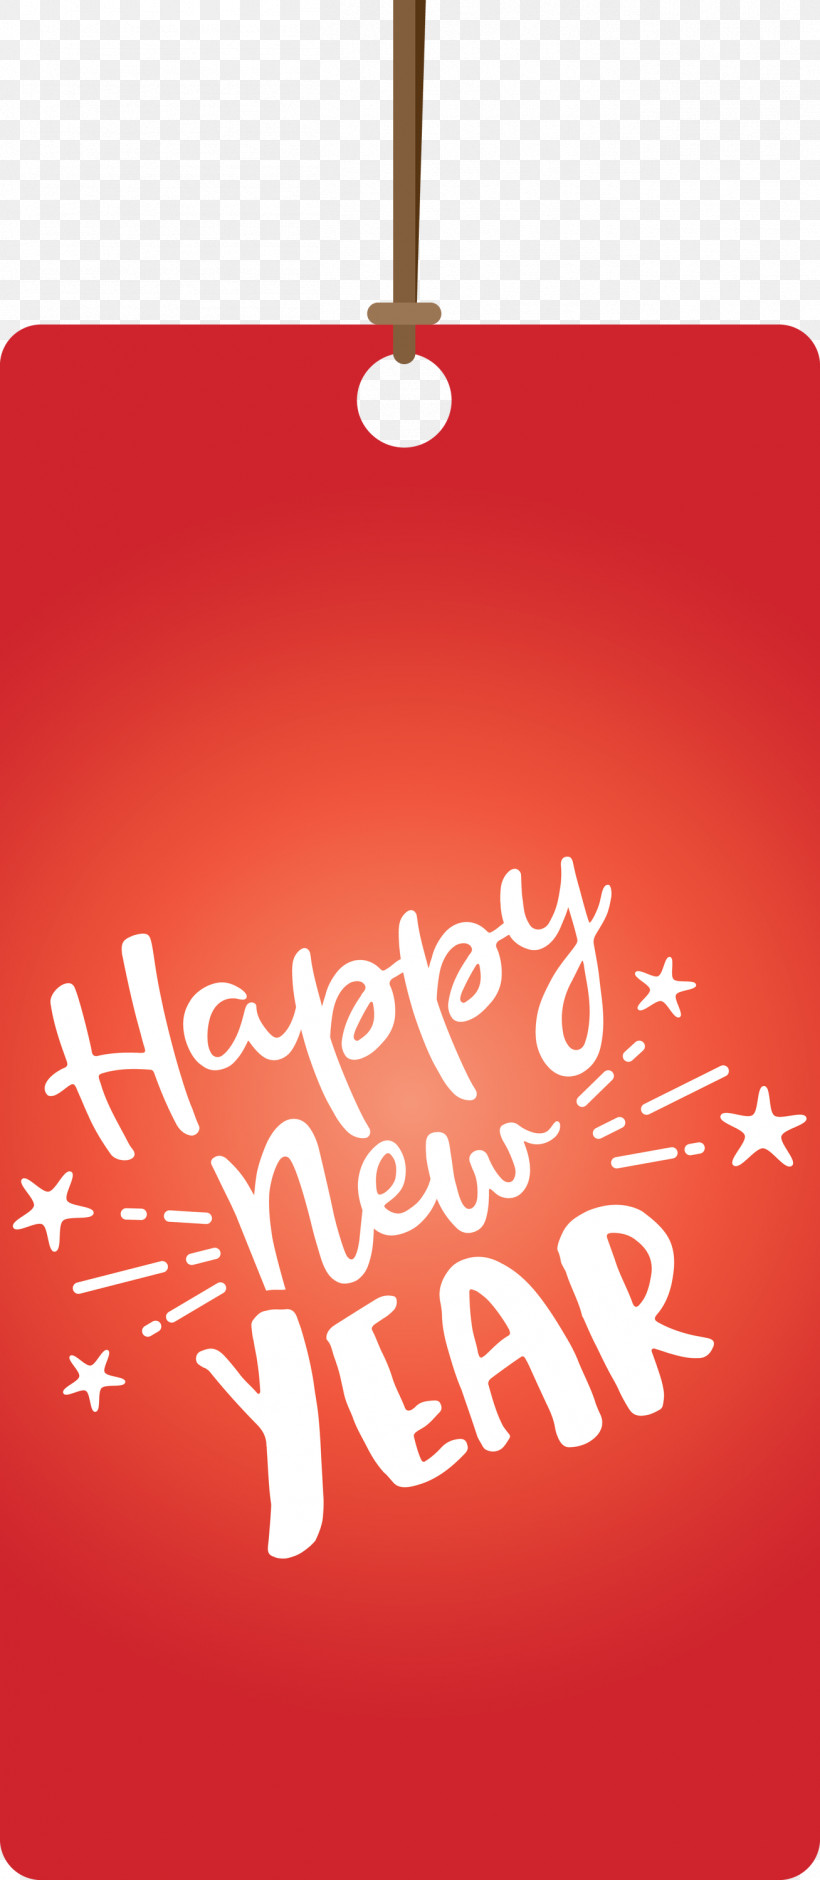 2021 Happy New Year 2021 Happy New Year Tag 2021 New Year, PNG, 1308x3000px, 2021 Happy New Year, 2021 Happy New Year Tag, 2021 New Year, Calligraphy, Christmas Day Download Free